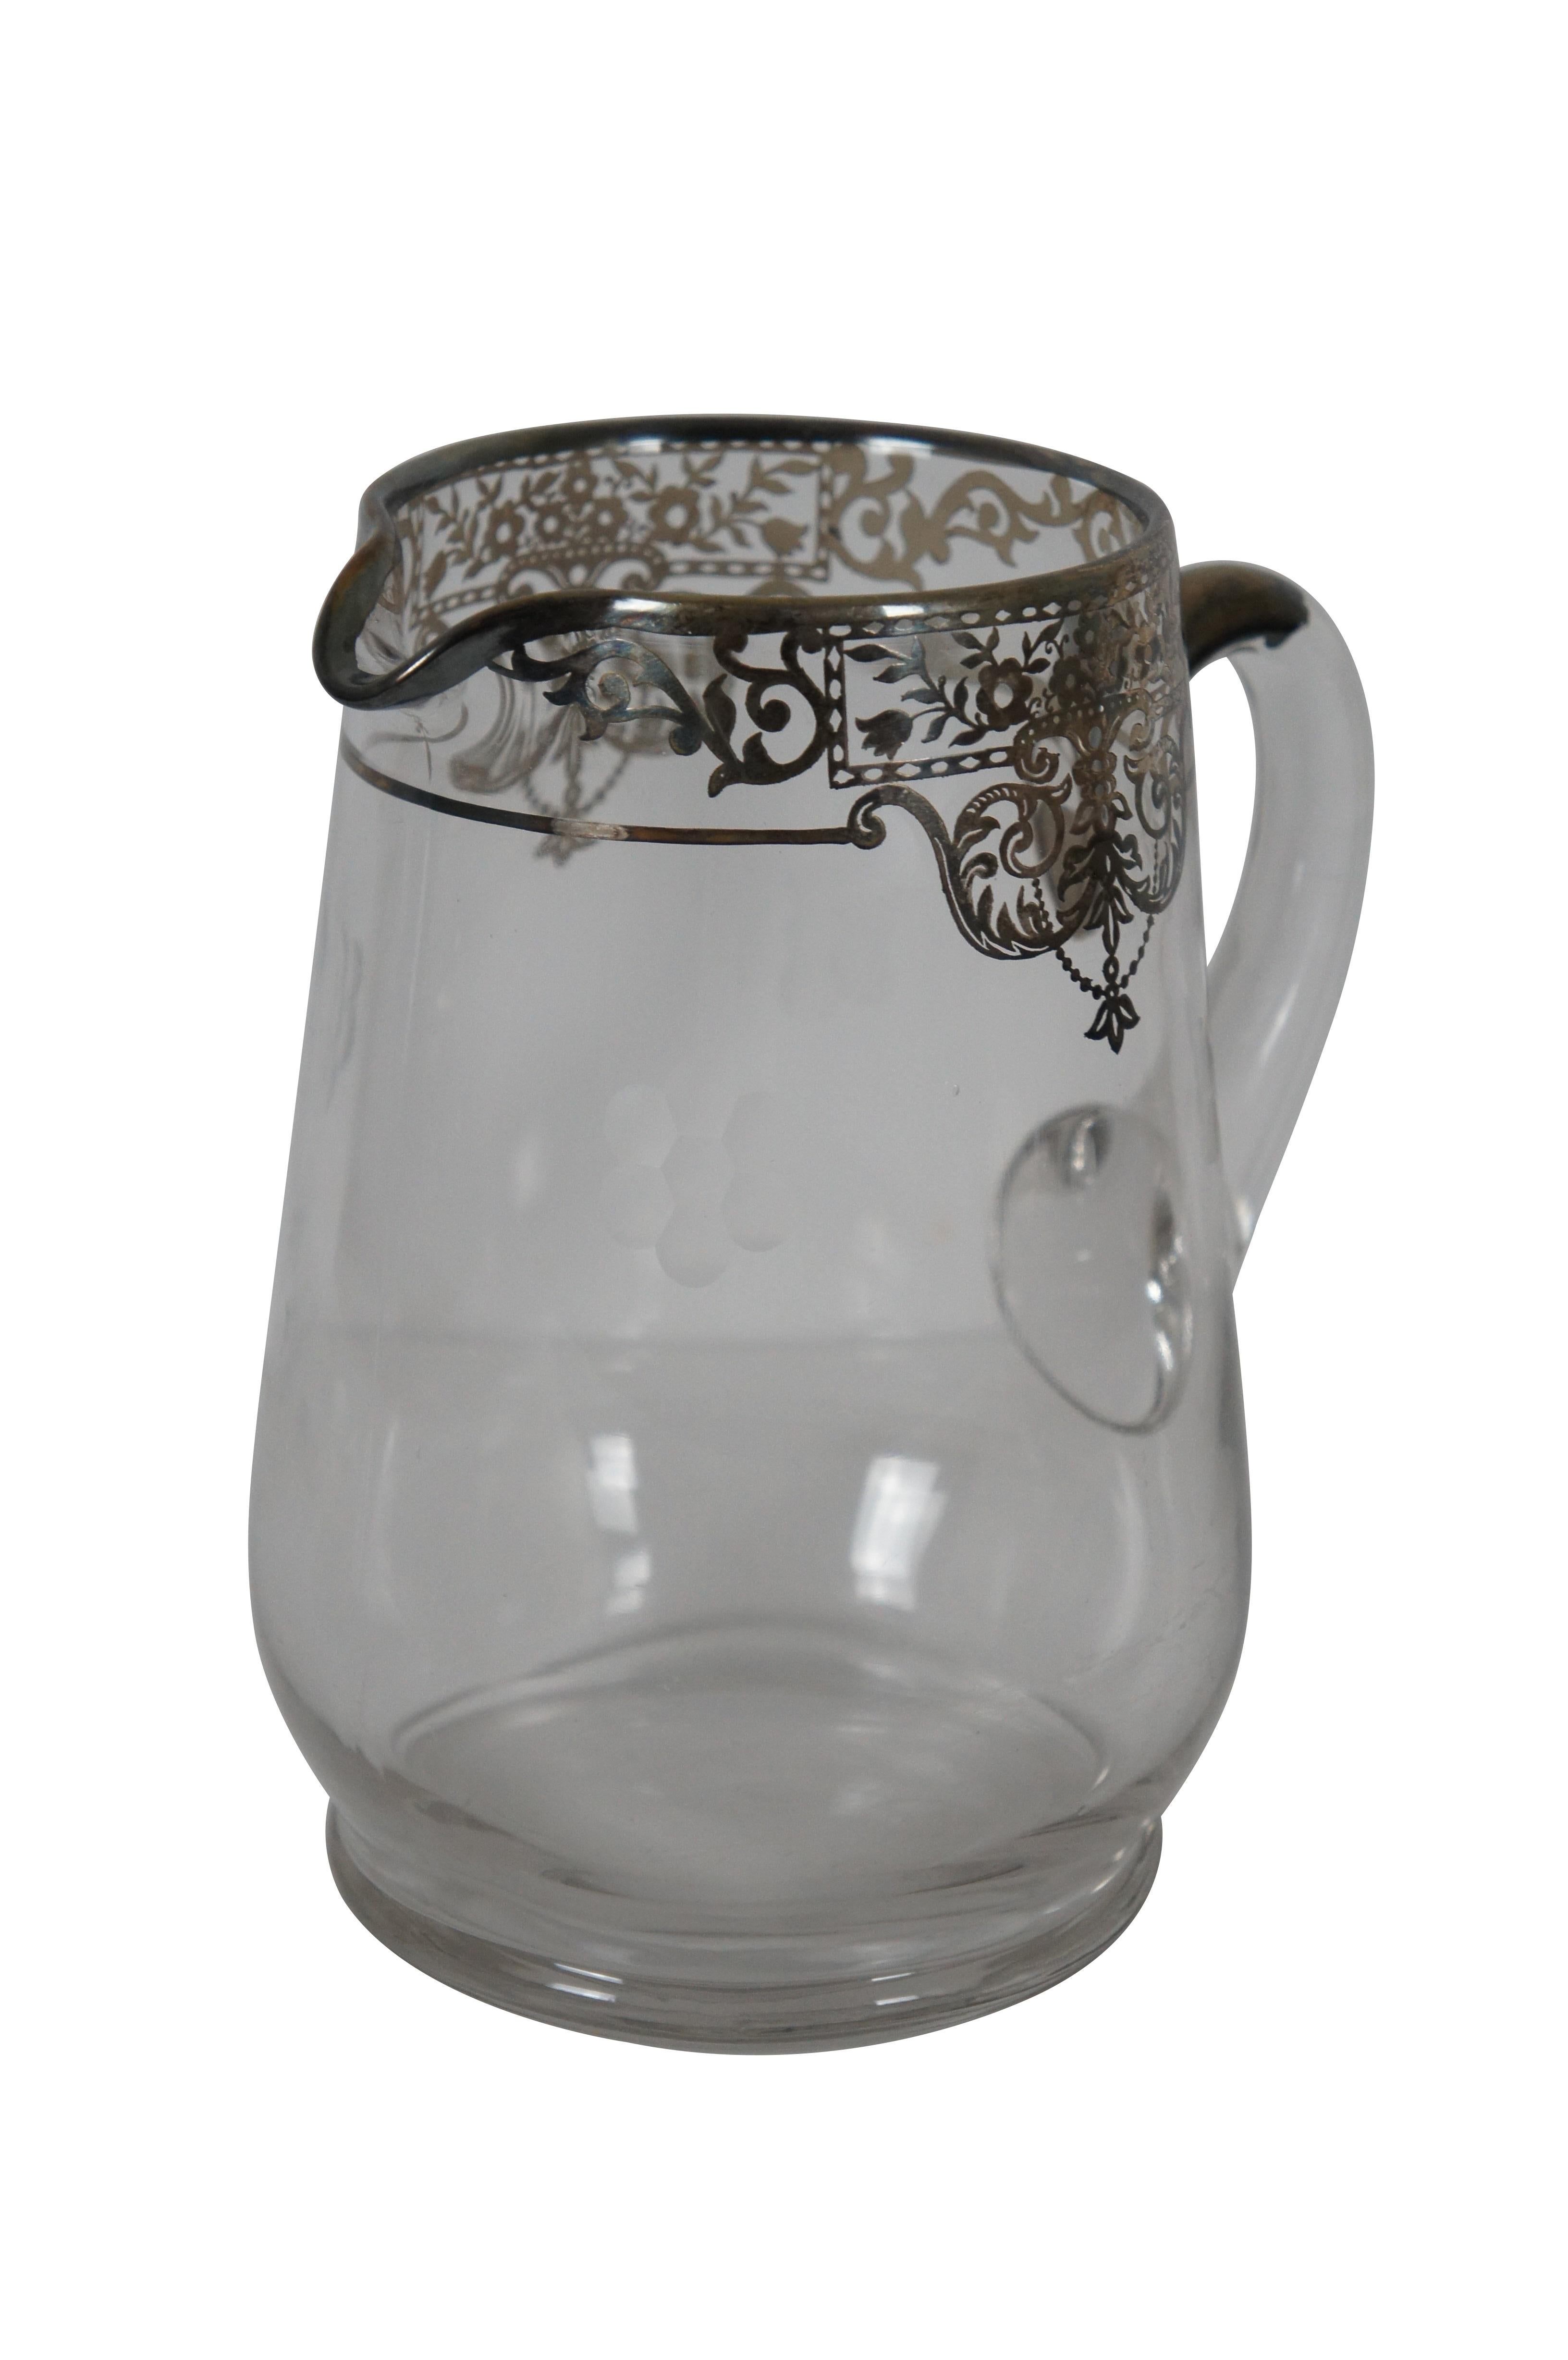 Antique clear glass water pitcher with simple etched flowers and an intricate floral sterling silver swag overlay around the rim and at the top of the handle.

Dimensions:
7” x 5.5” x 7.75” (Width x Depth x Height)